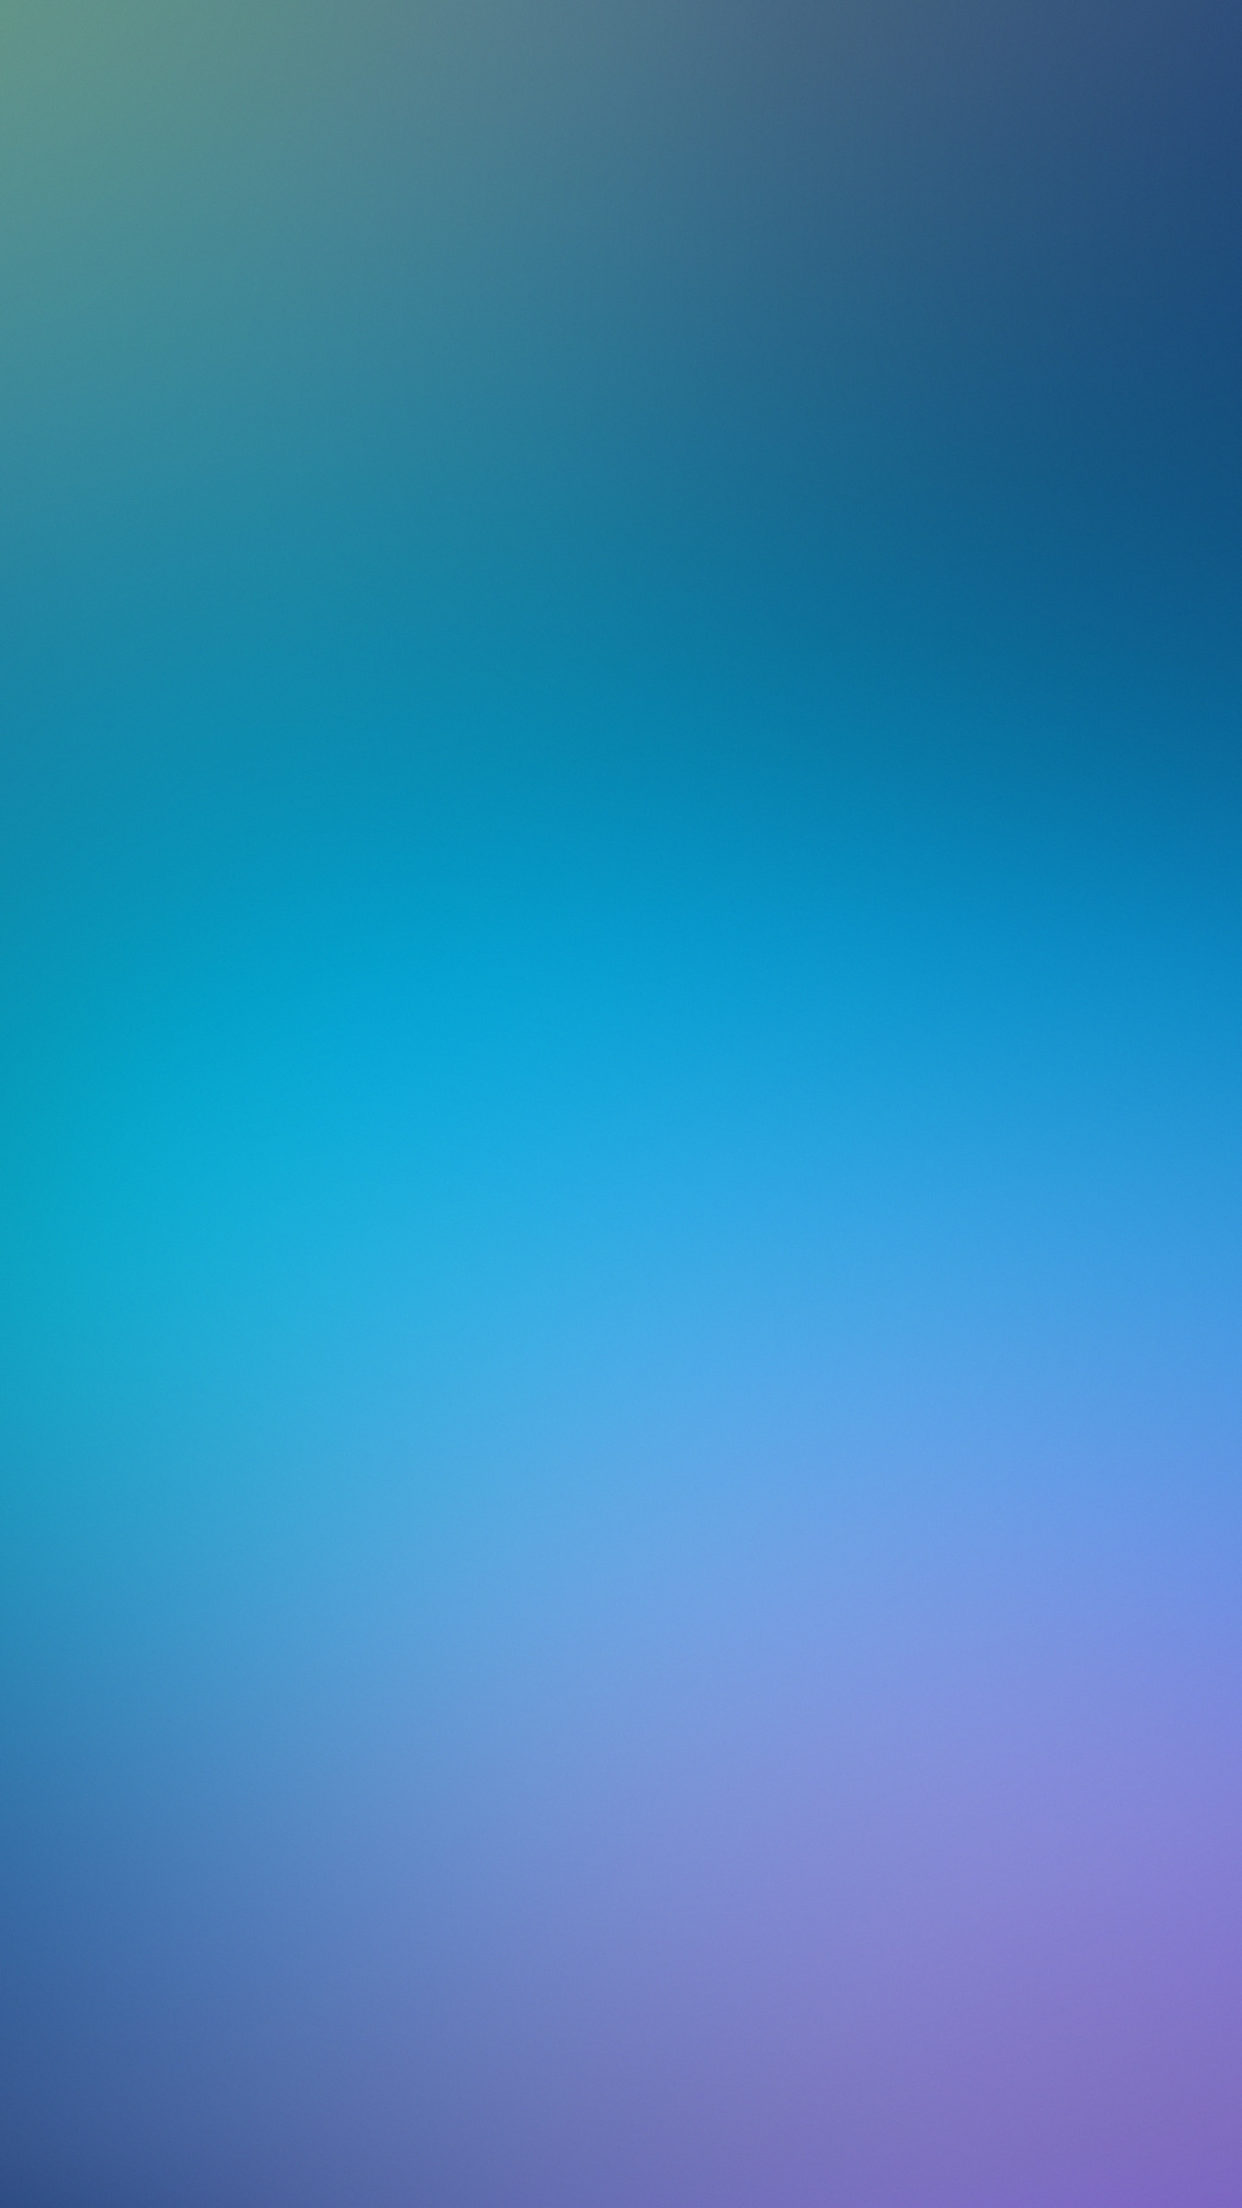 Simple Design Background For Windows Mac Android And Iphone HD Wallpapers Backgrounds Images